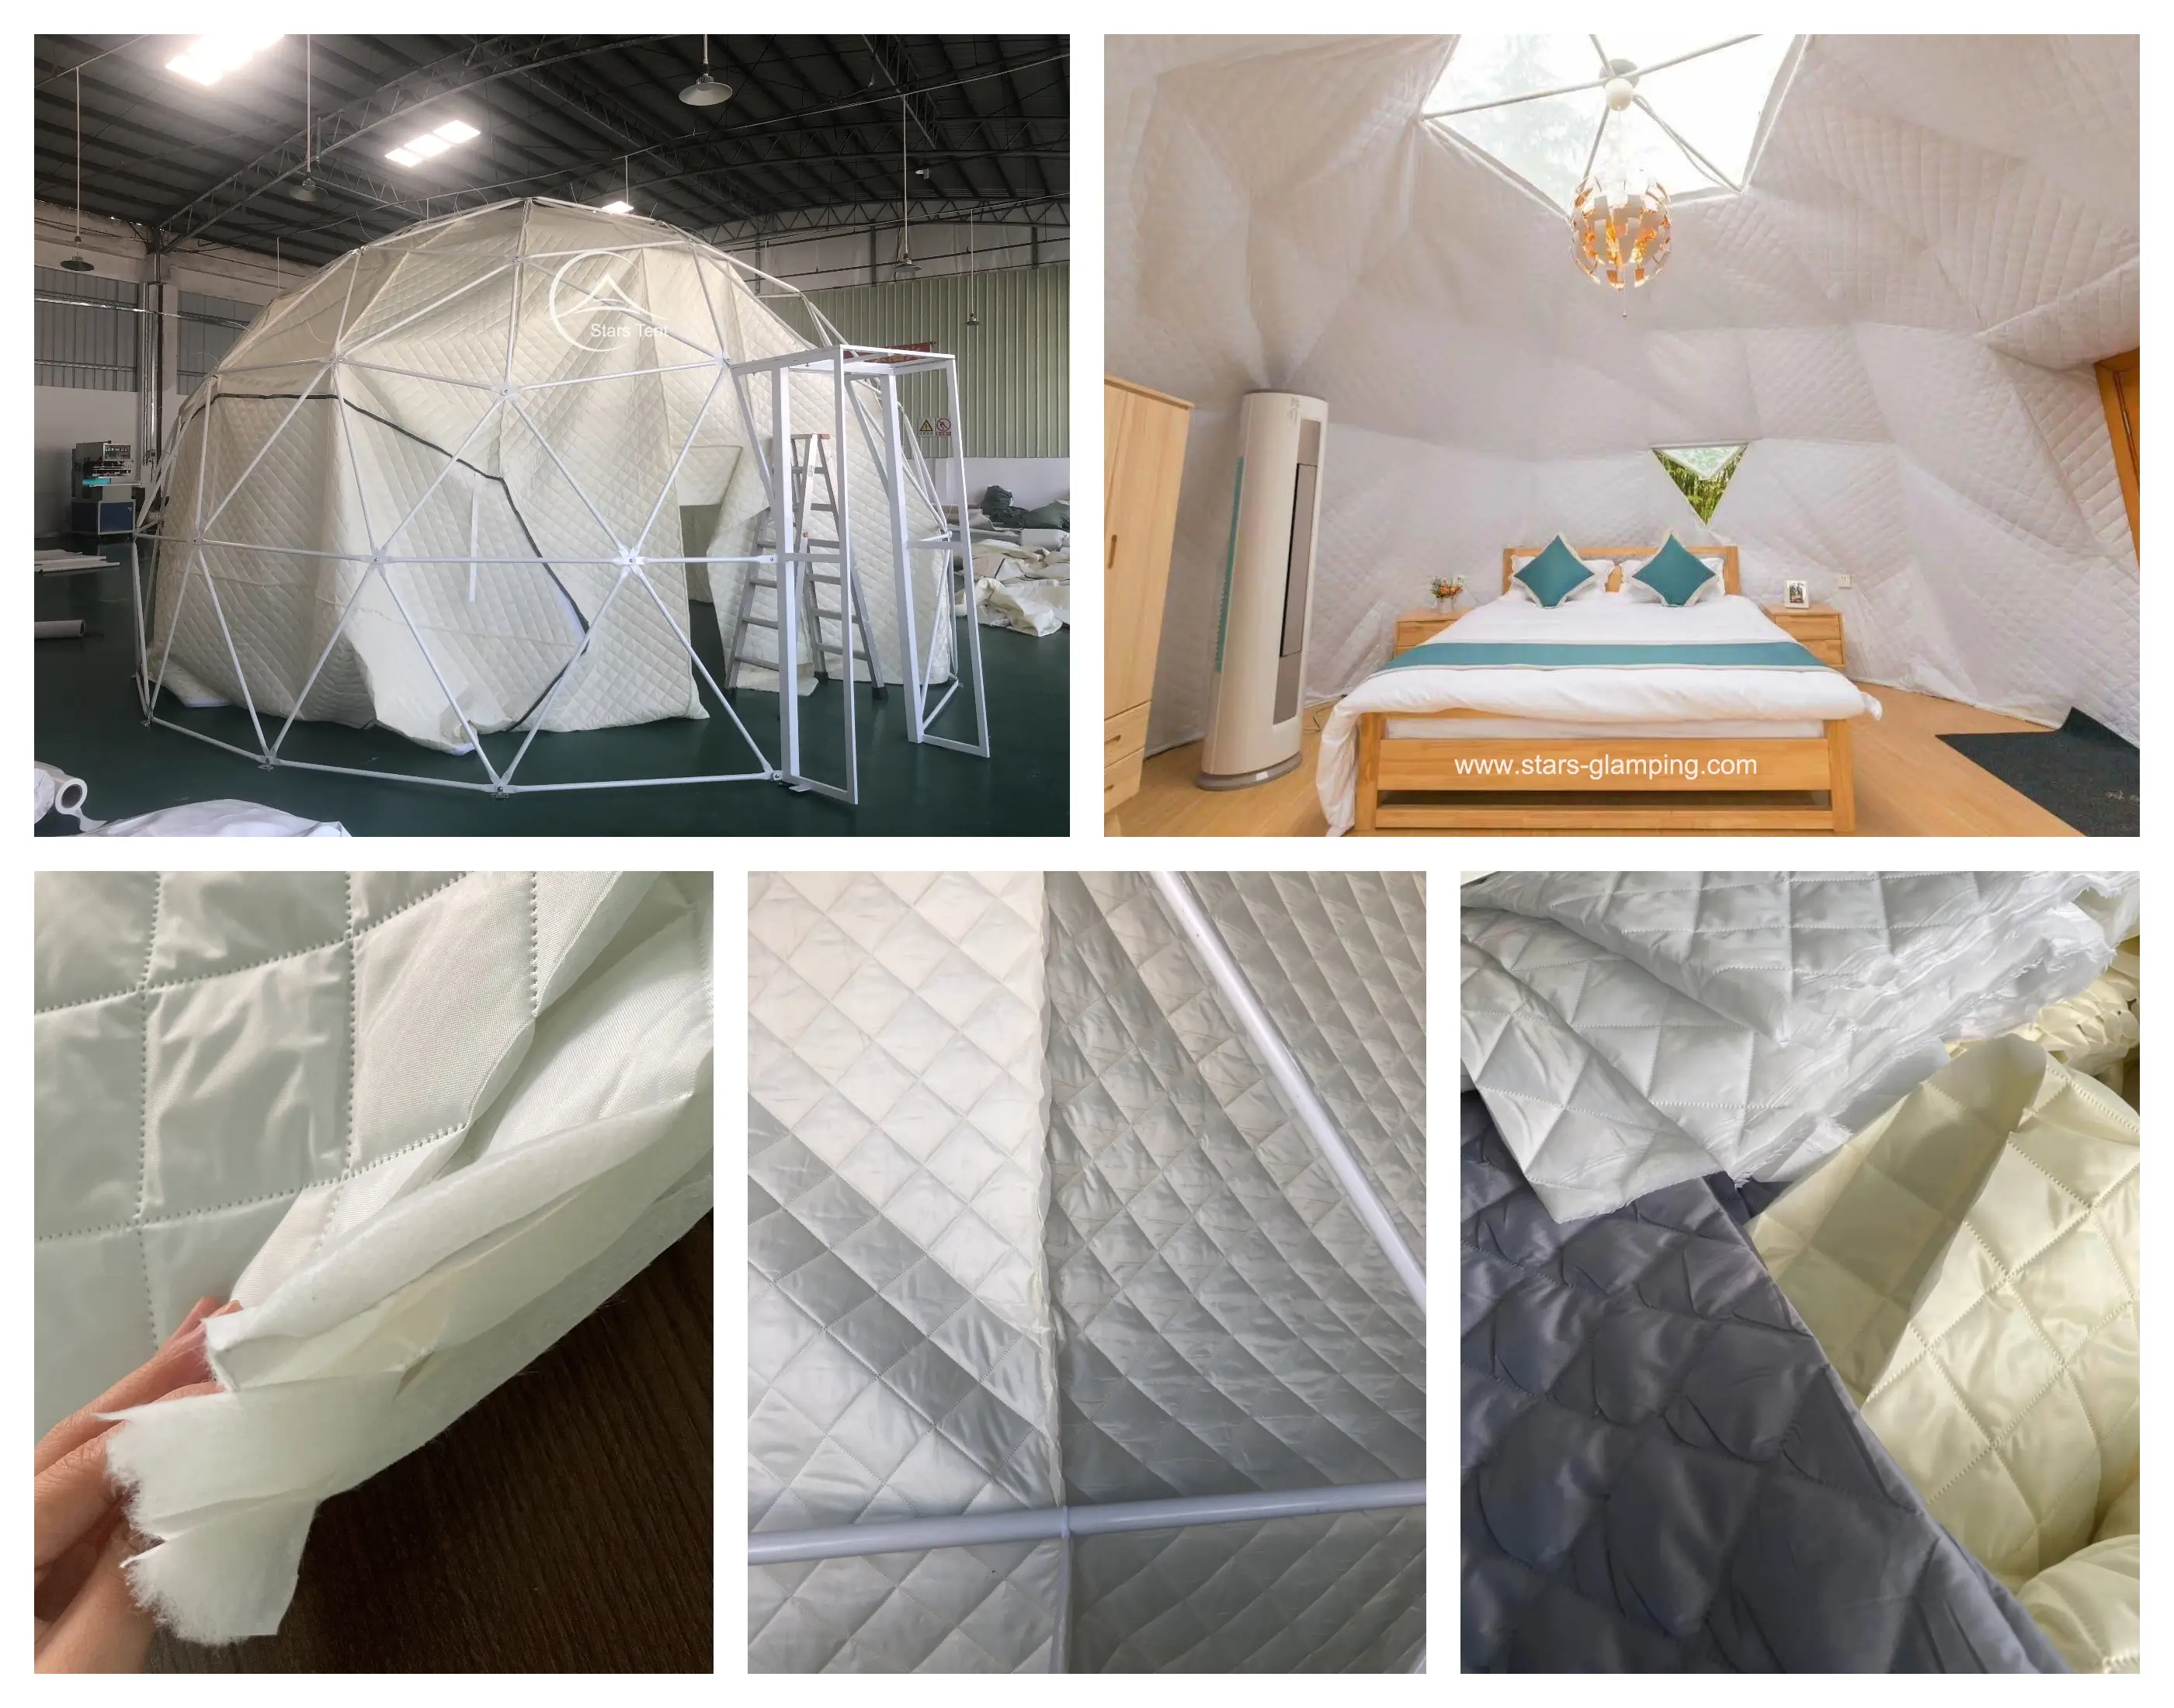 Glamping Dome For Sale, Insulated Dome Tent